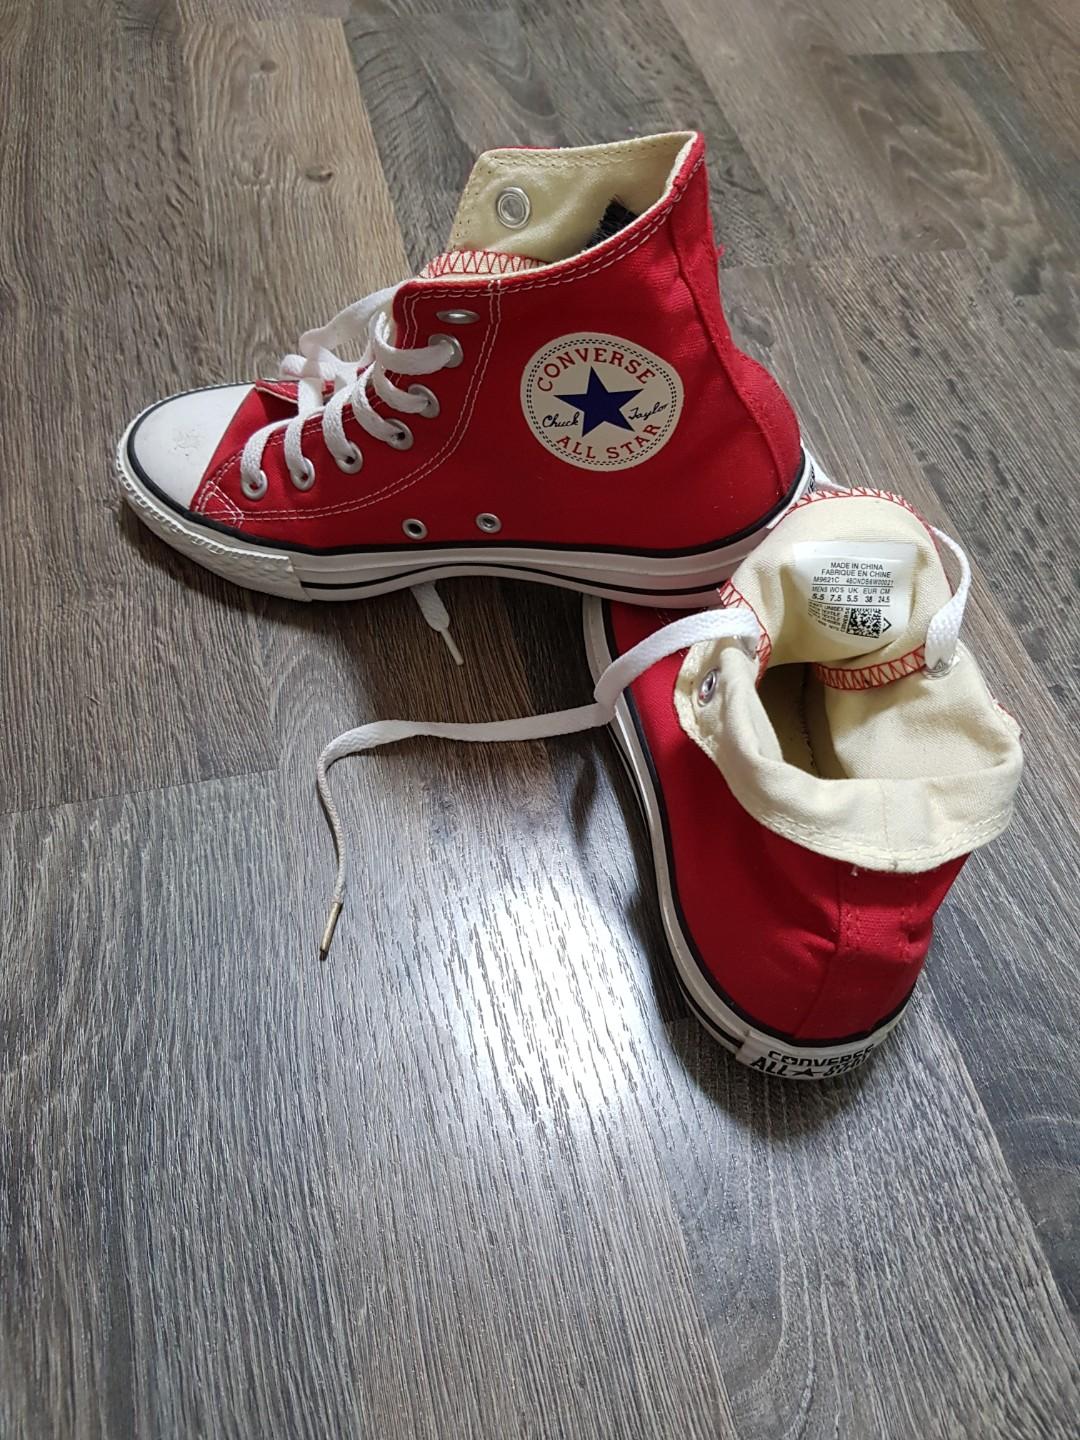 old chuck taylor shoes